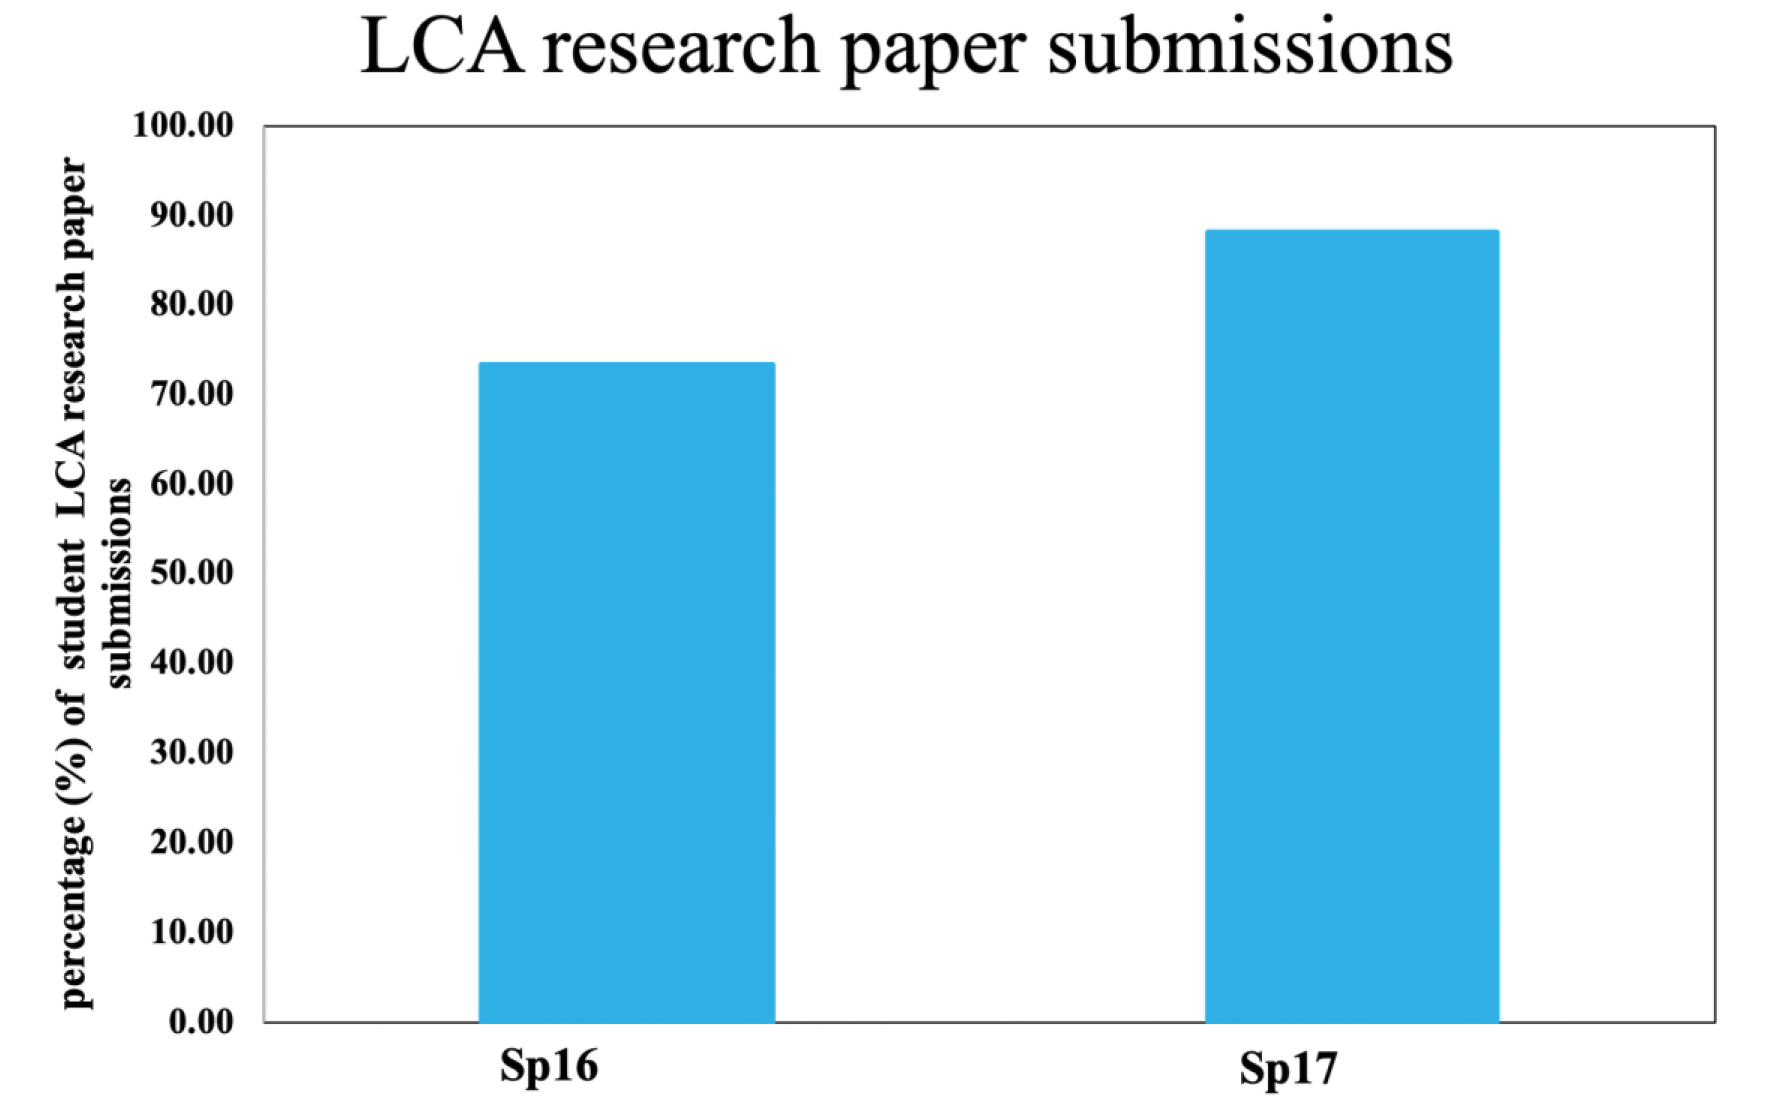 The percentage of LCA research paper submissions by students during the semesters Sp16 and Sp17 in SEGE 100 (PHY/CHEM/BIO 100) course. The research-based LCA project was the most comprehensive pedagogical activity of the course. The overall assessment of the student performance included quizzes, classroom contributions and/or homework assignments, the midterms, which included an outline of the LCA research paper, the final LCA research project, and an accompanying PowerPoint presentation. 